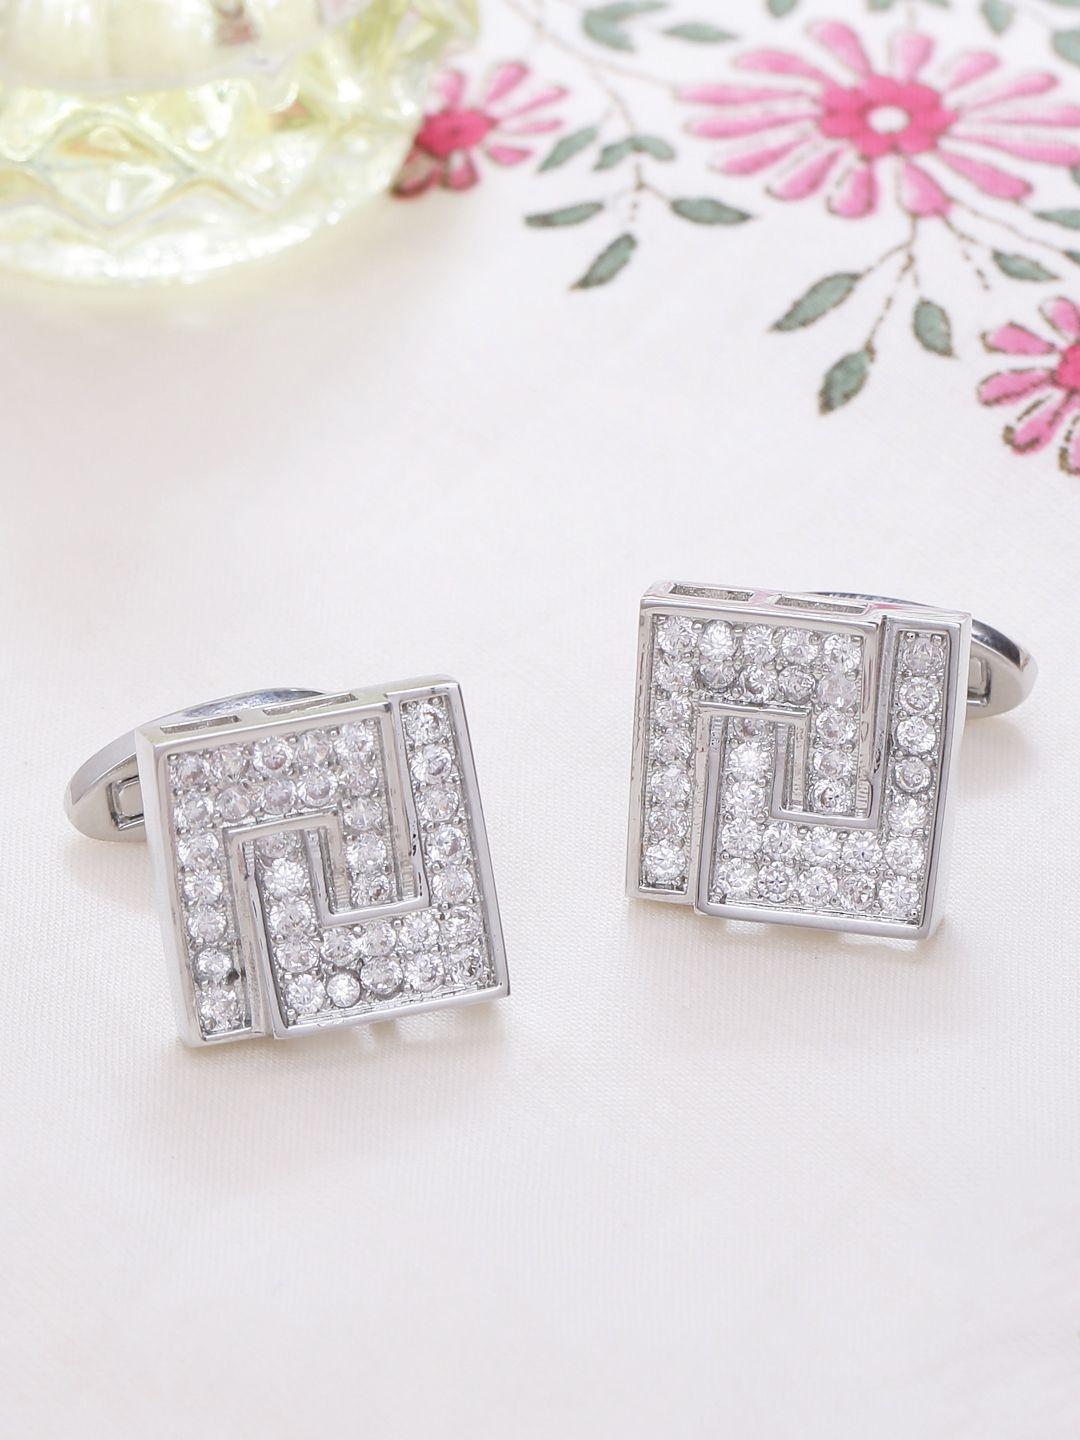 tistabene rhodium-plated & silver-toned square embellished cufflinks